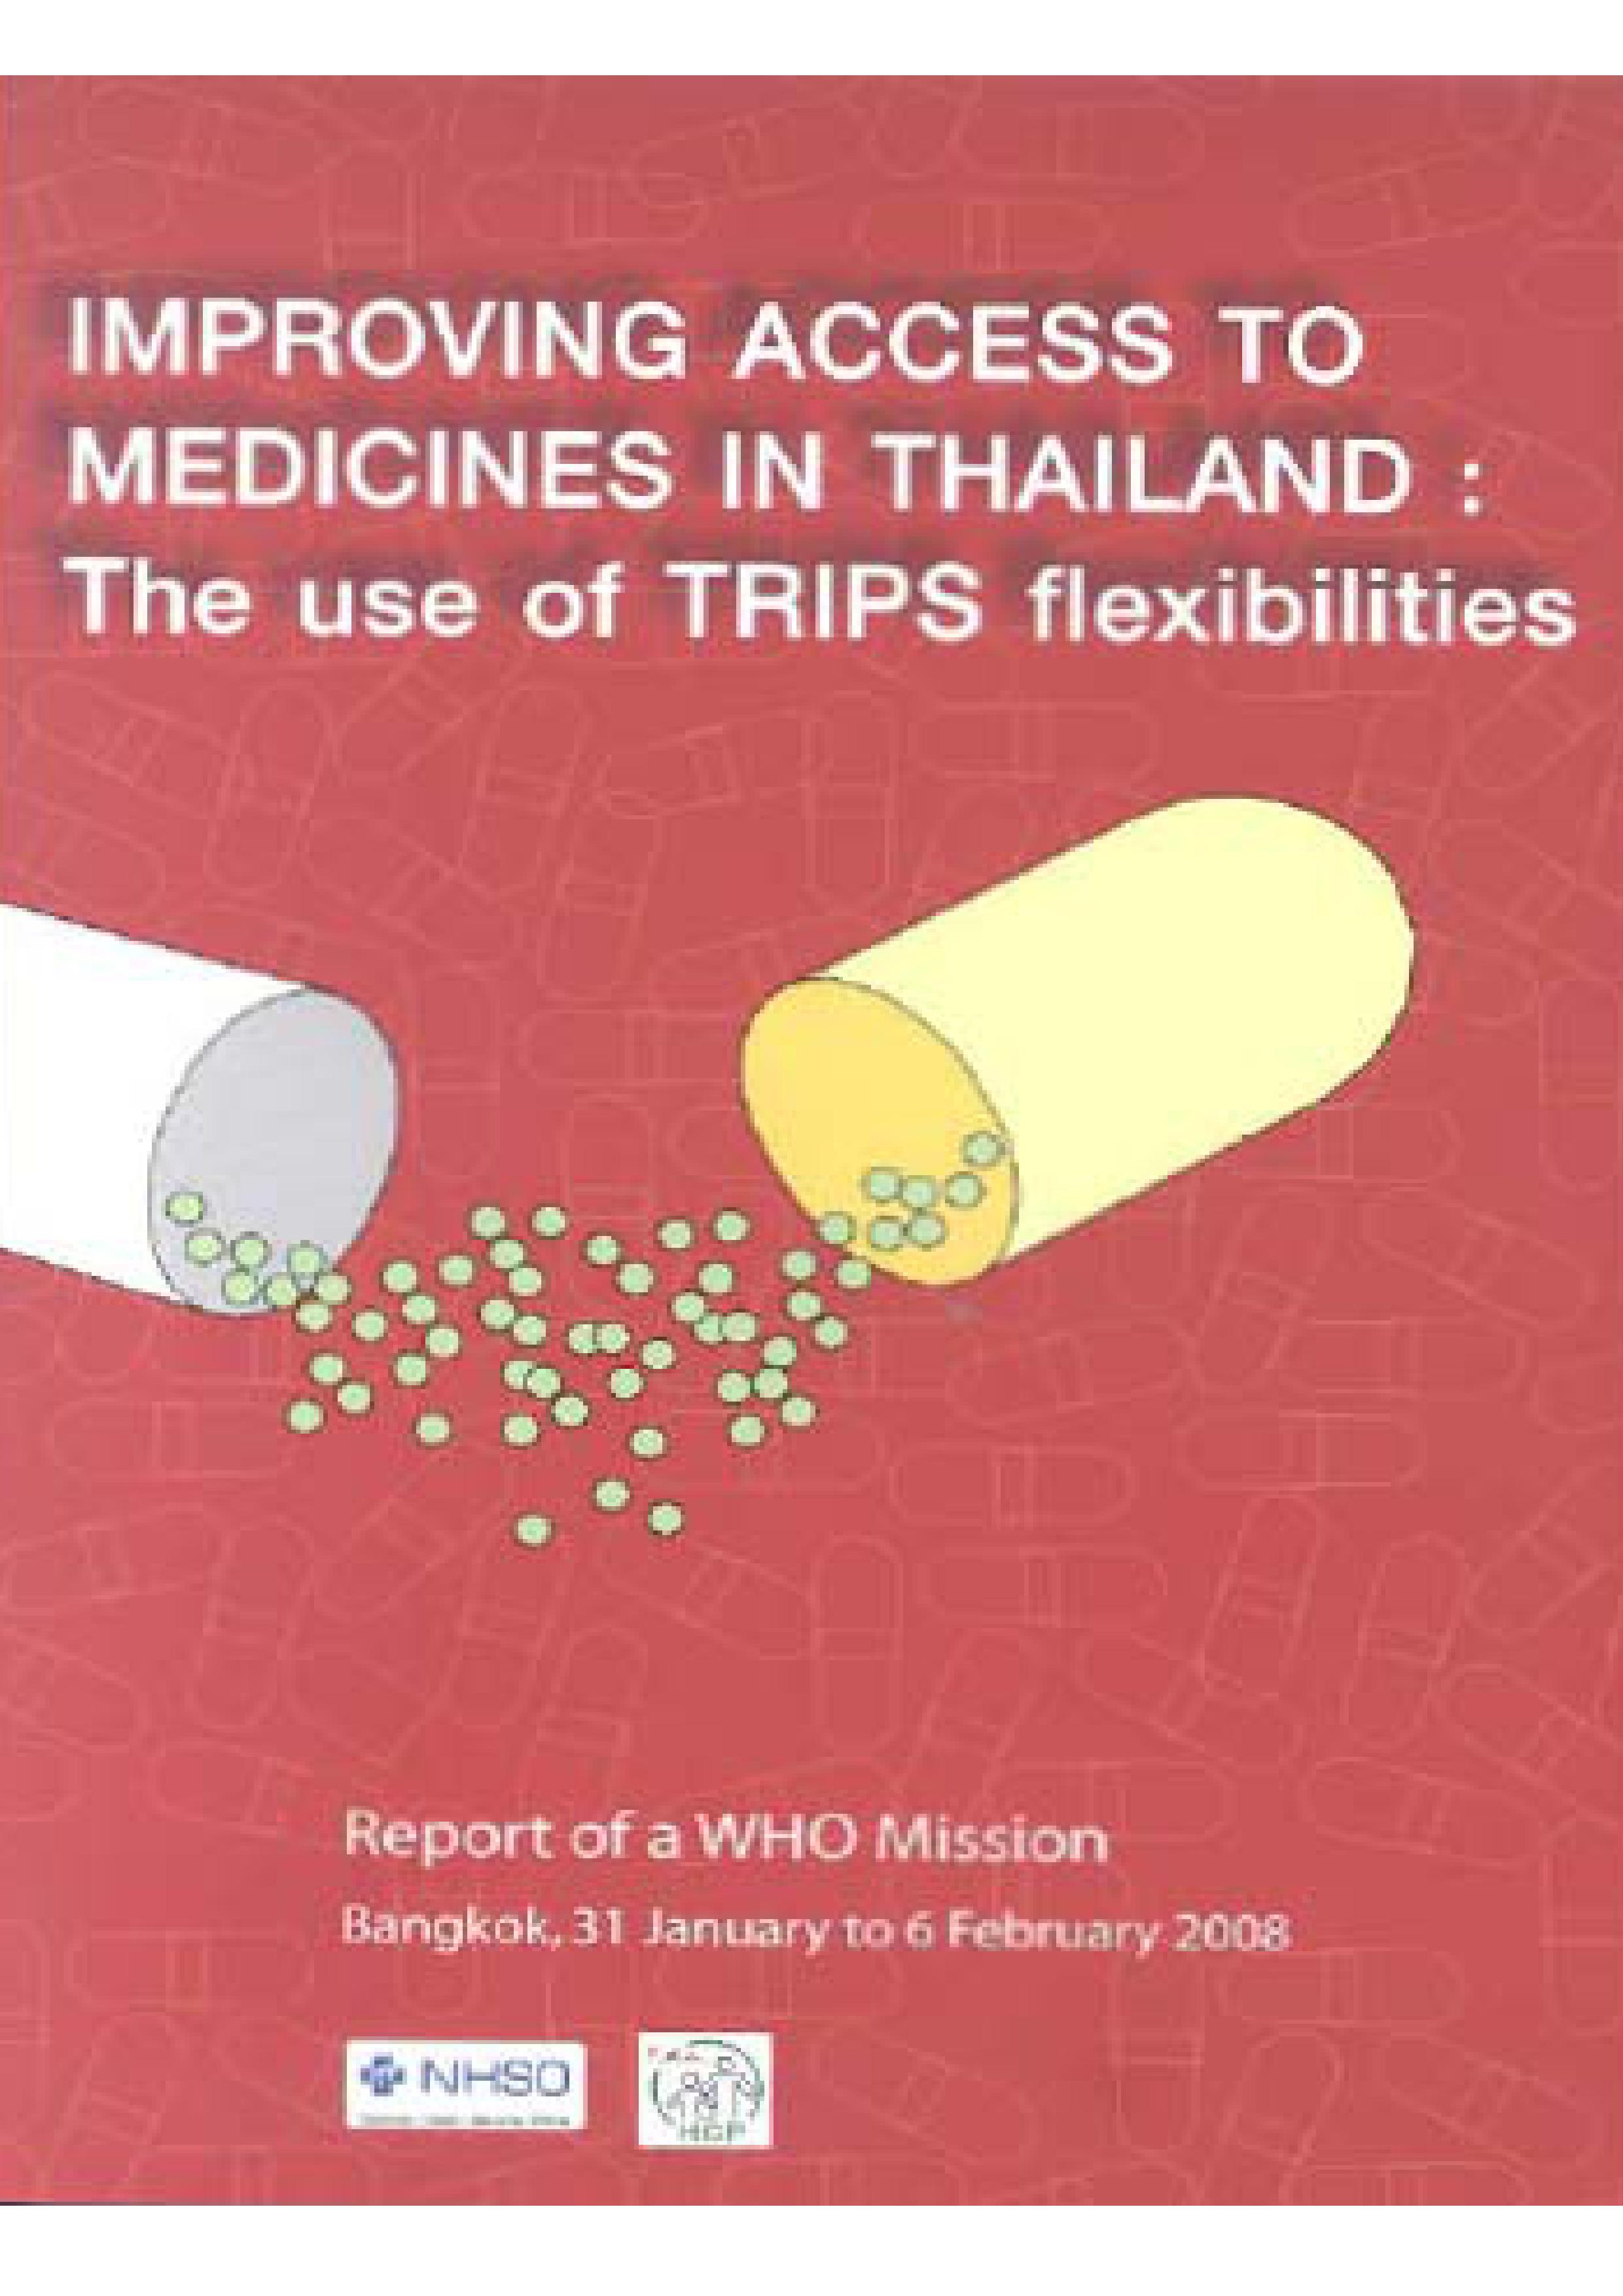 Improving Access to Medicines in Thailand: The use of TRIPS flexibilities